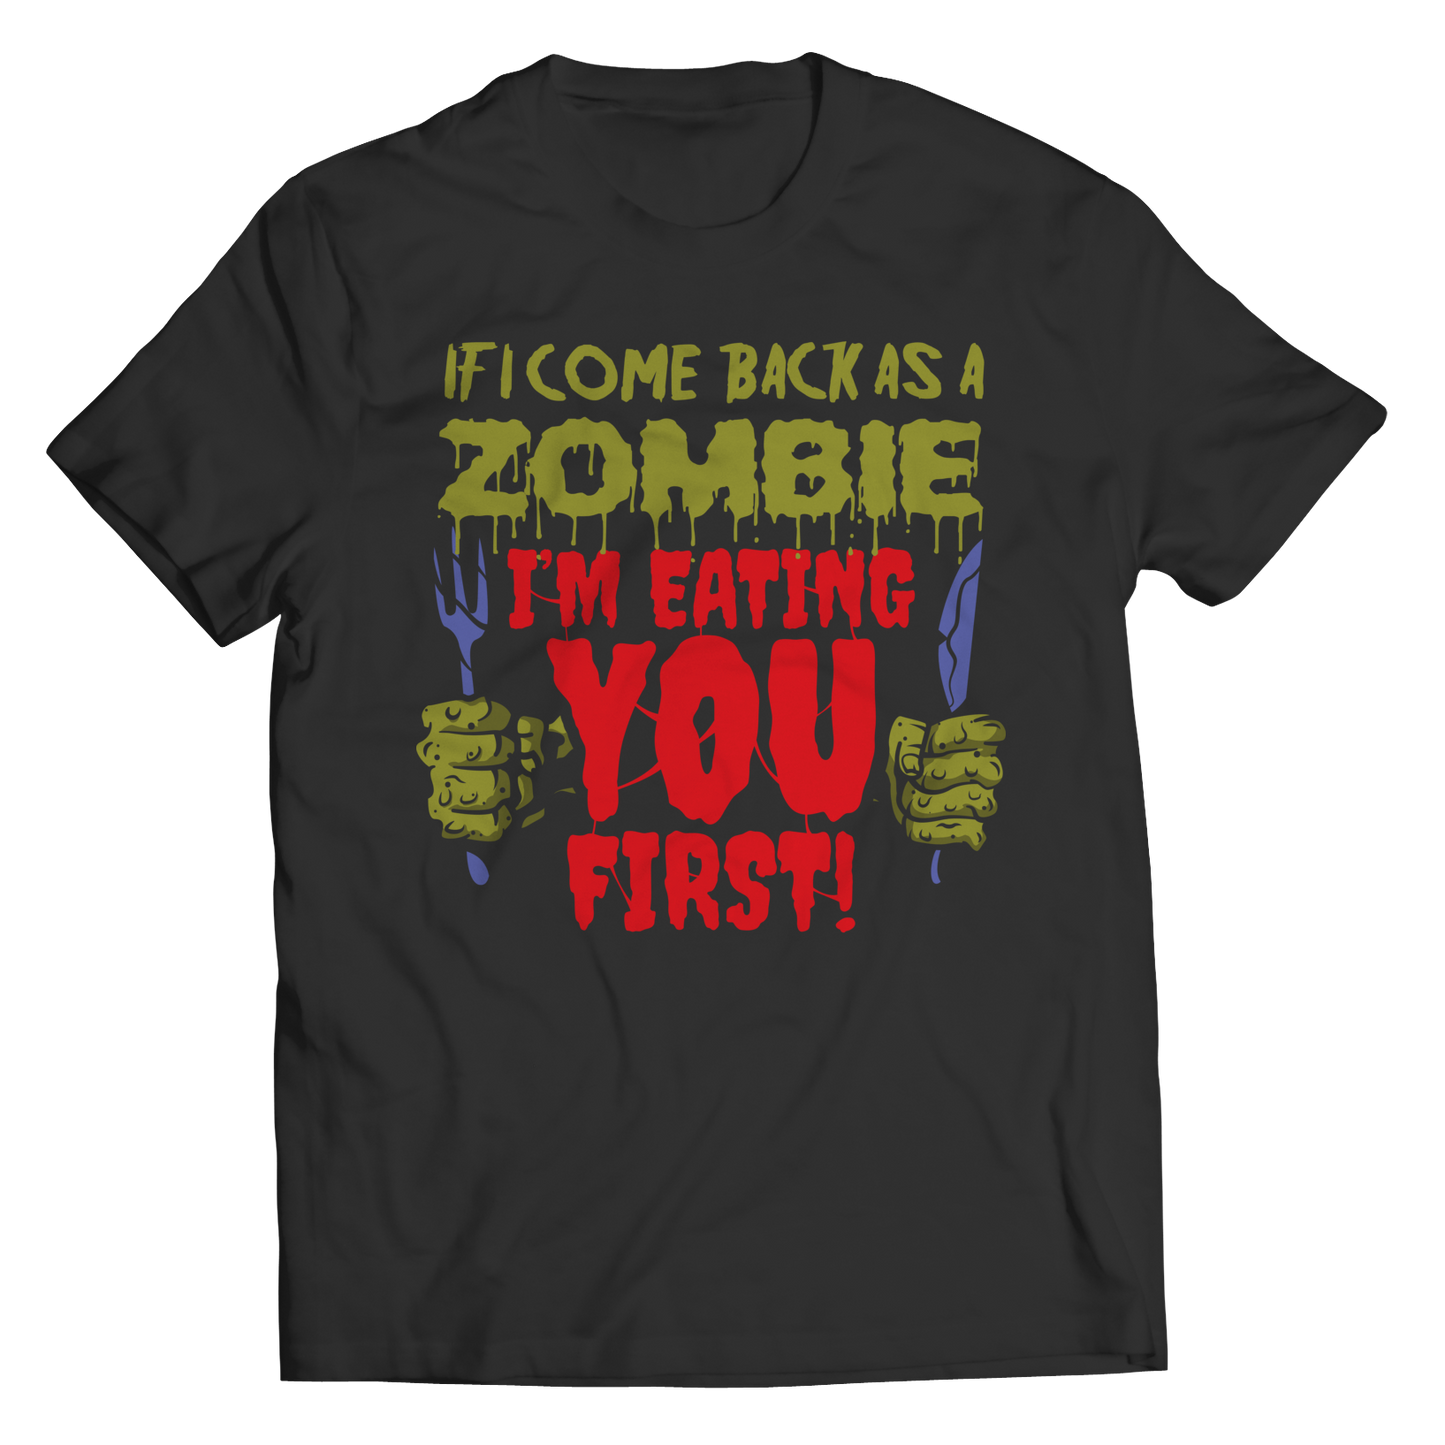 If I Come Back As A Zombie I'm Eating You First Shirt